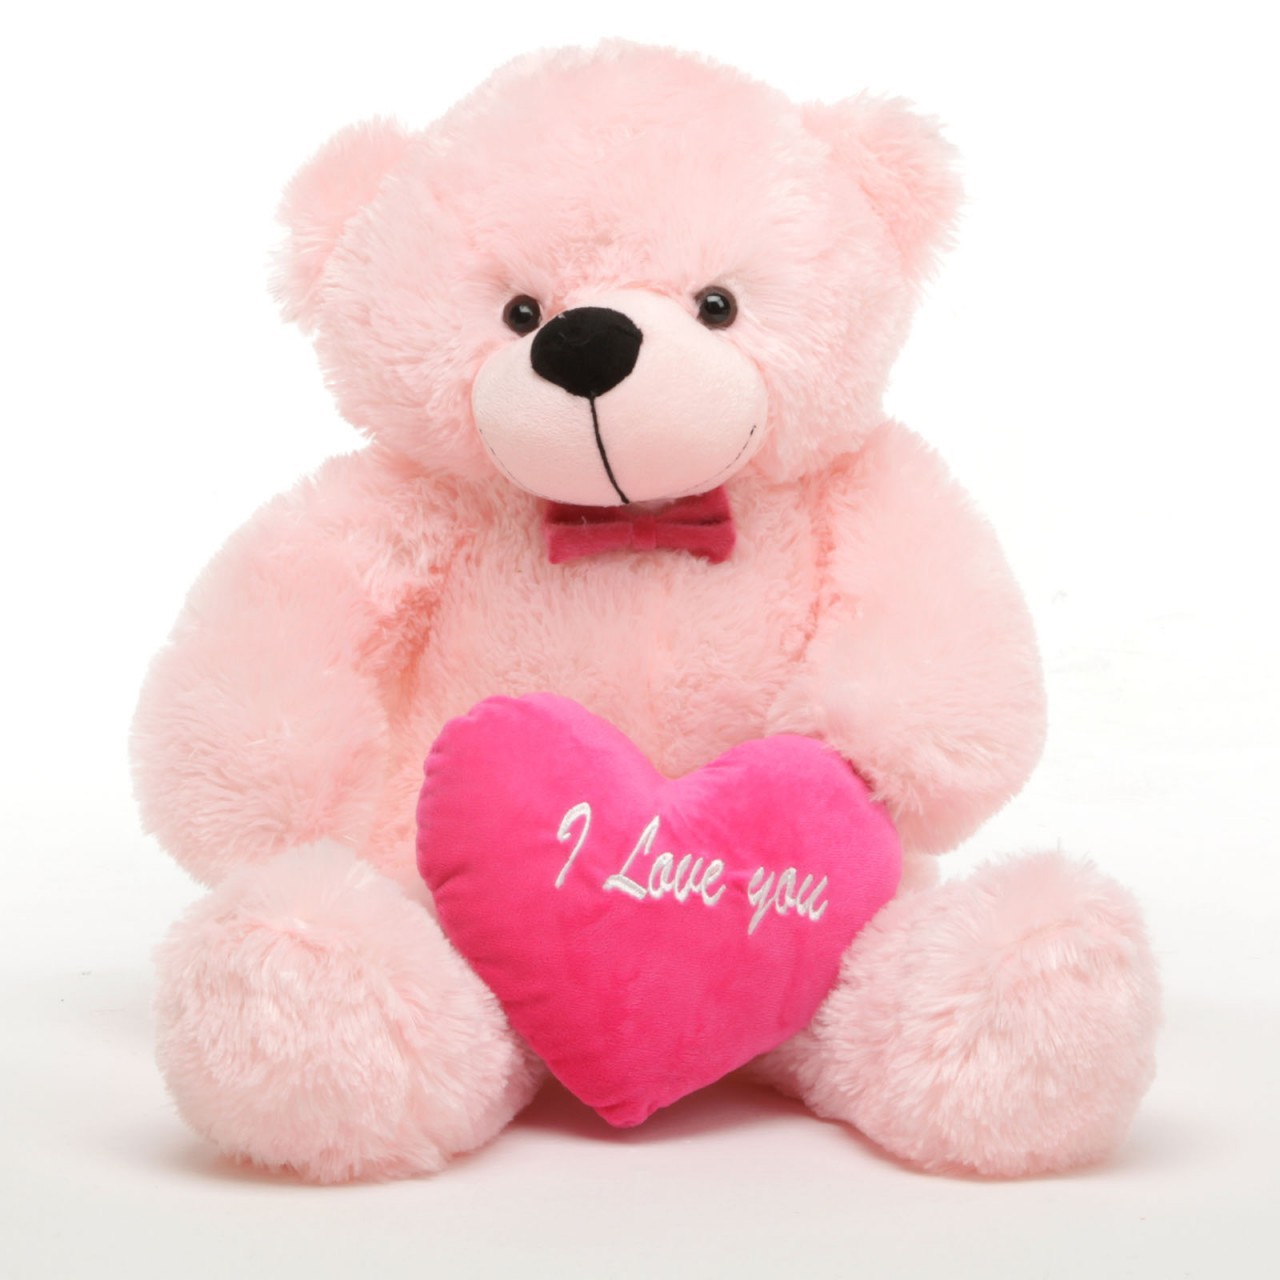  images Lovely and Cute Pink Teddy Bear wallpaper photos 34605180 1280x1280